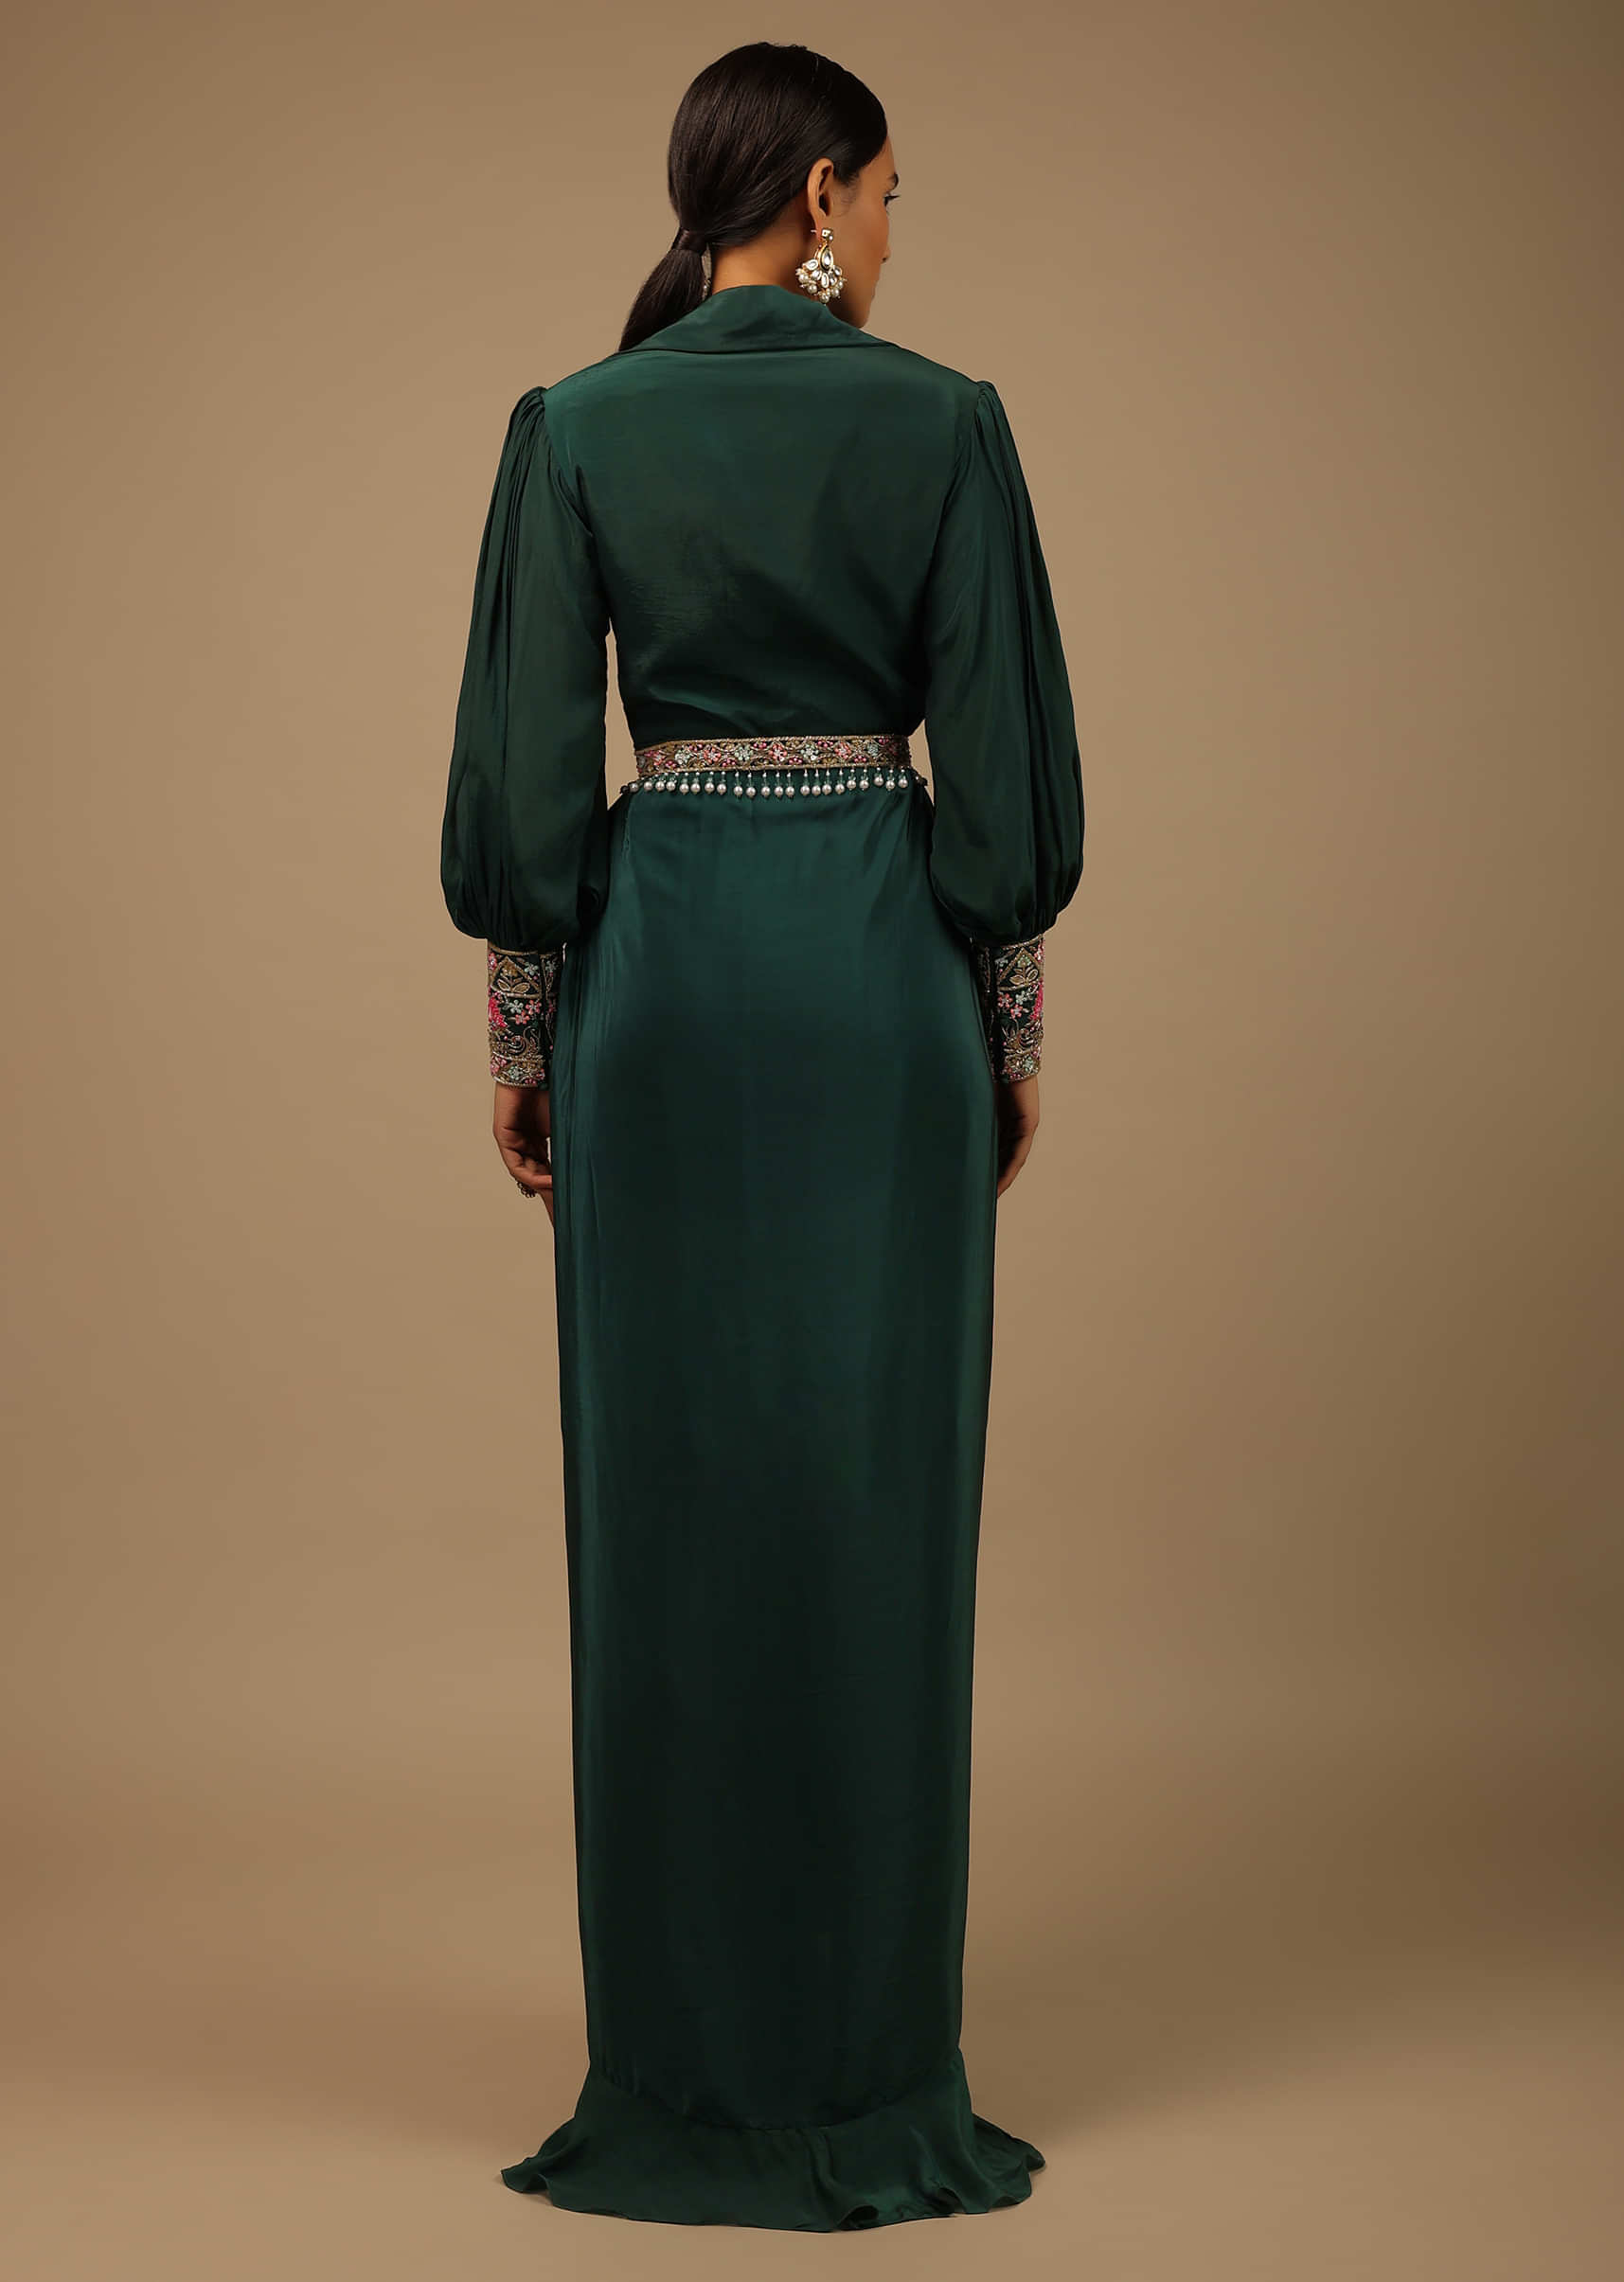 Dark Pine Green High Low Gown With Collar Neckline, Bishop Sleeves And Multicolor Handwork On The Cuffs